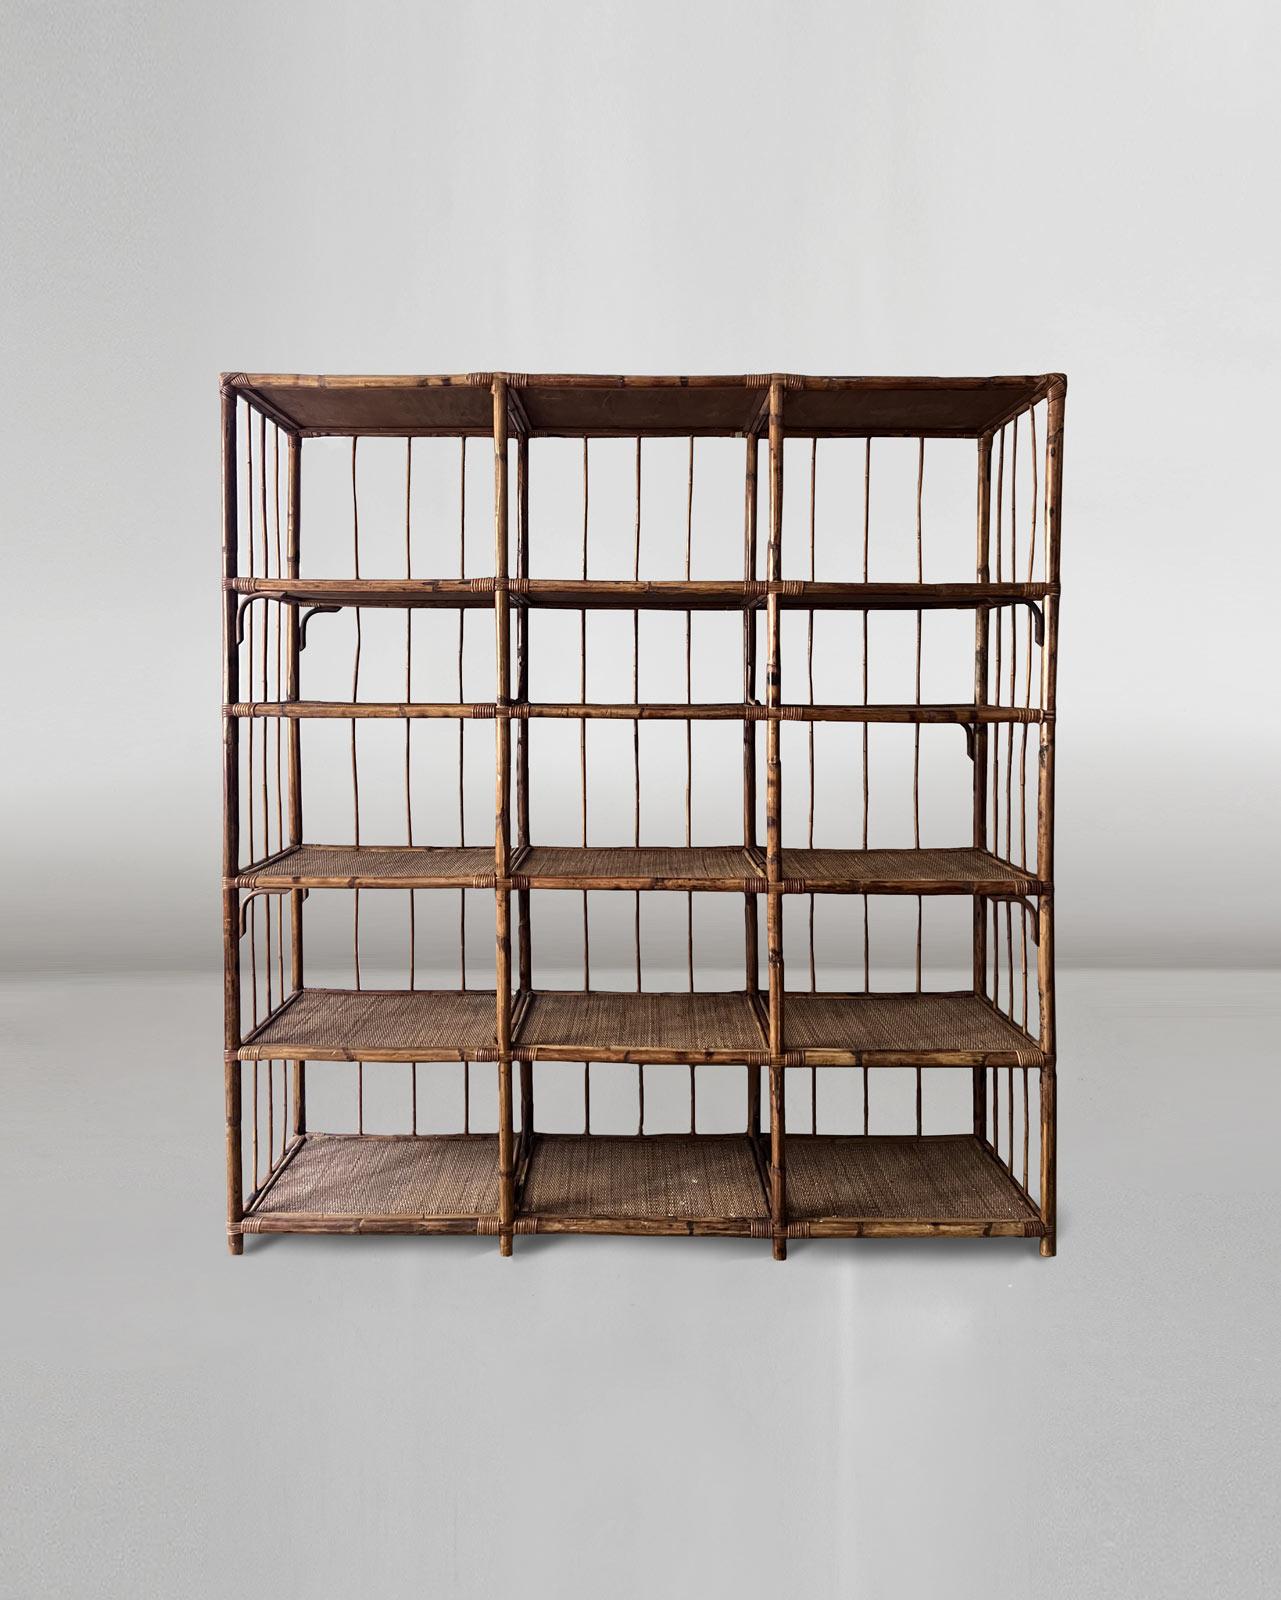 Large bamboo and wicker bookcase from 1950
Bookcase dimensions: 200W x 210H x 45D cm
Materials: bamboo, wicker.
Production: Italian artisan production 1950